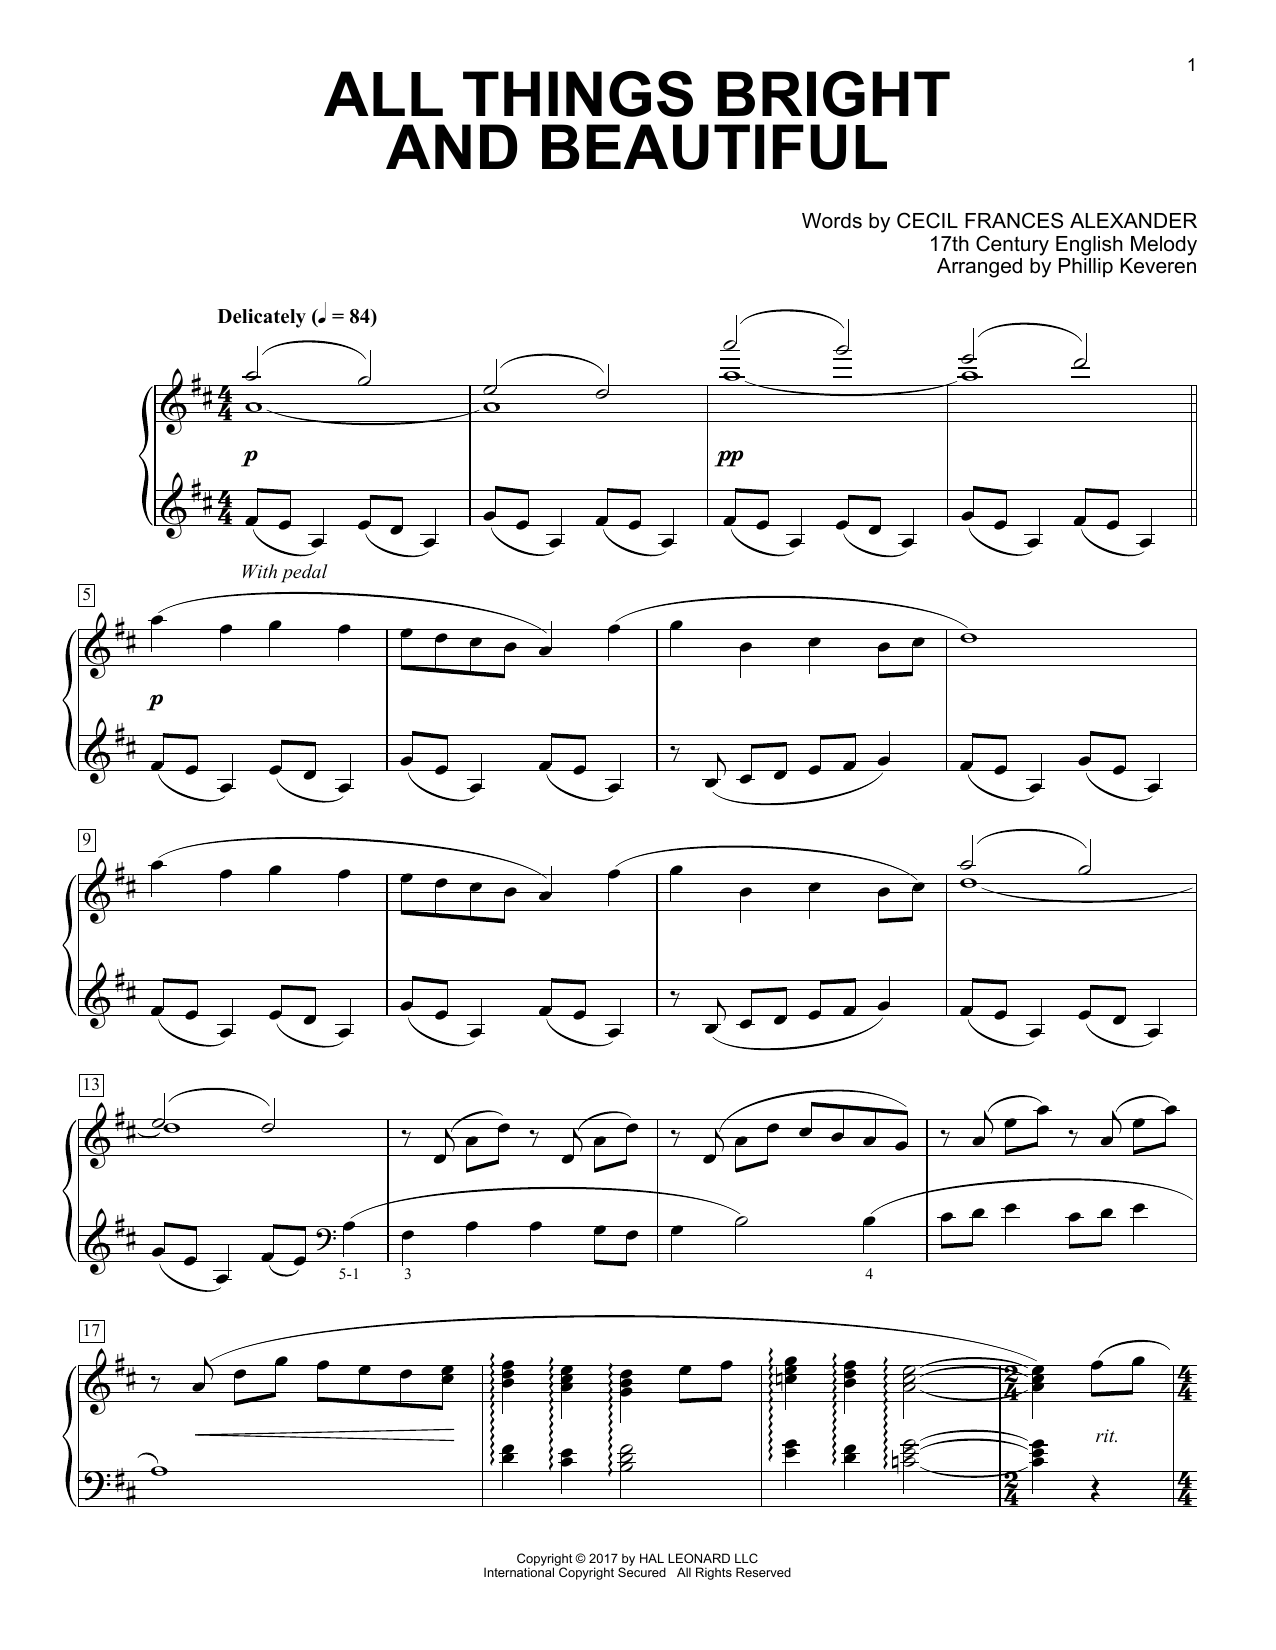 Download Phillip Keveren All Things Bright And Beautiful Sheet Music